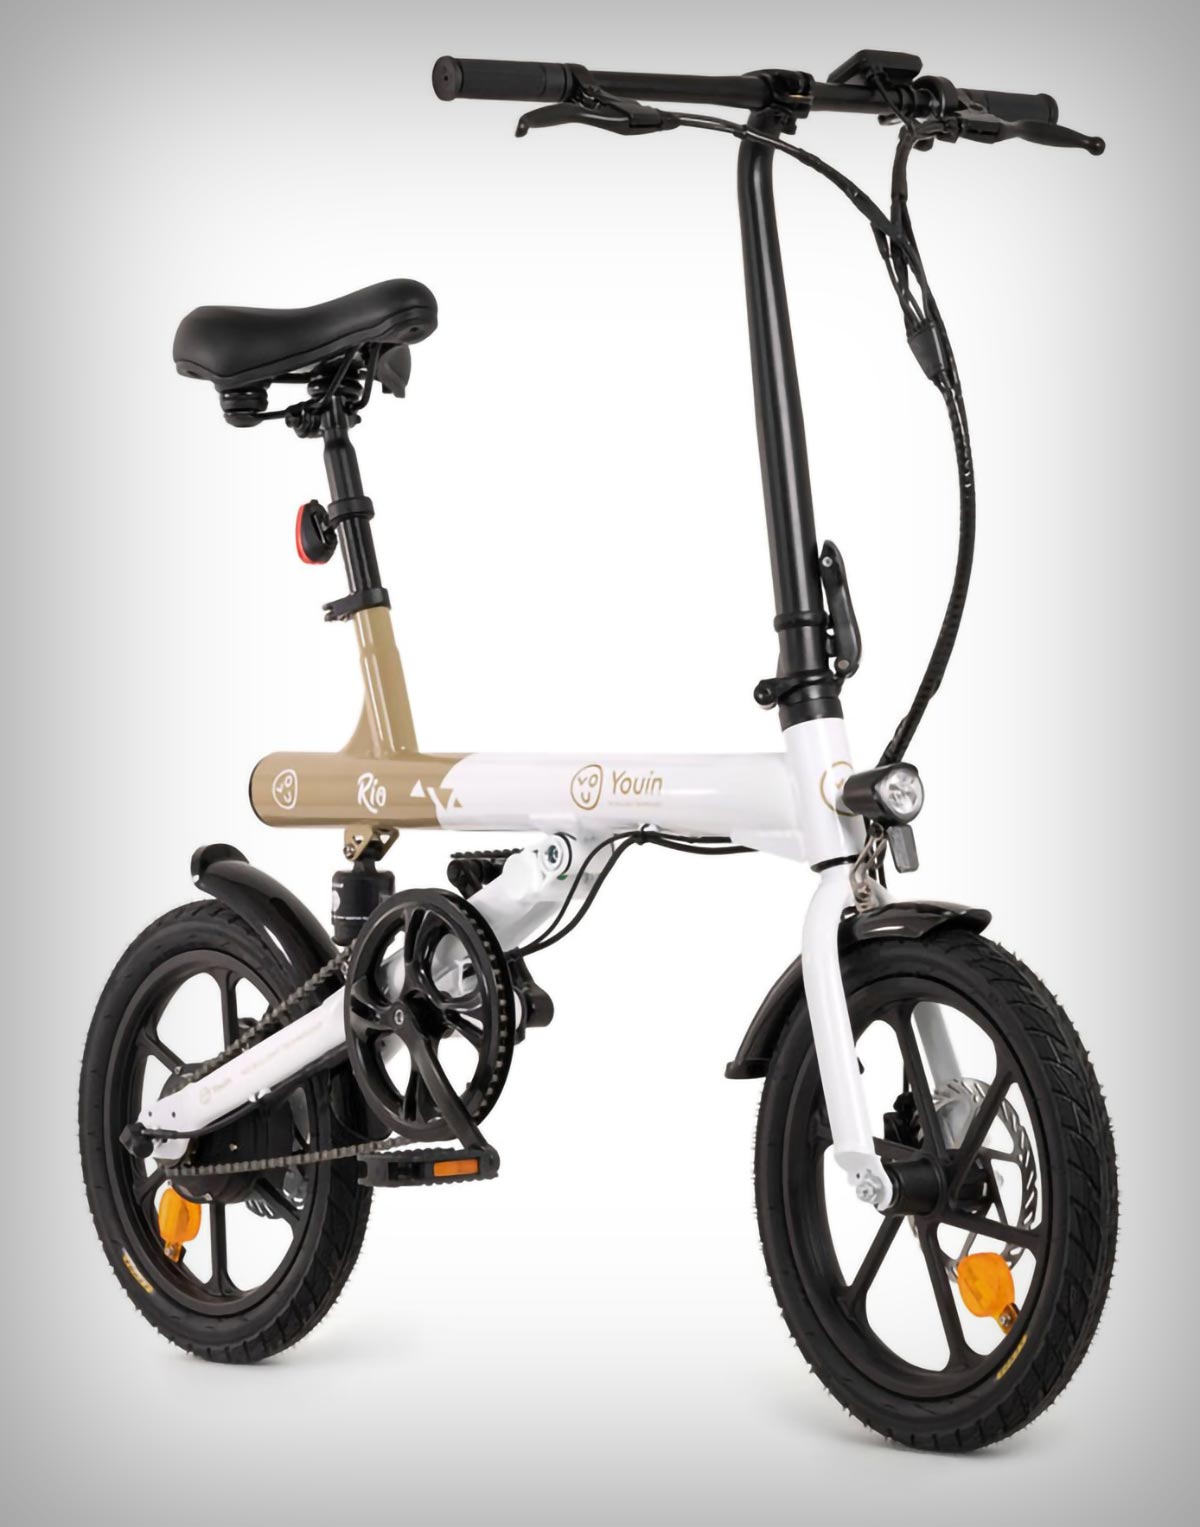 Youin Rio Is The Brand'S Smallest Folding Electric Bike That Is Ideal To Take On The Go